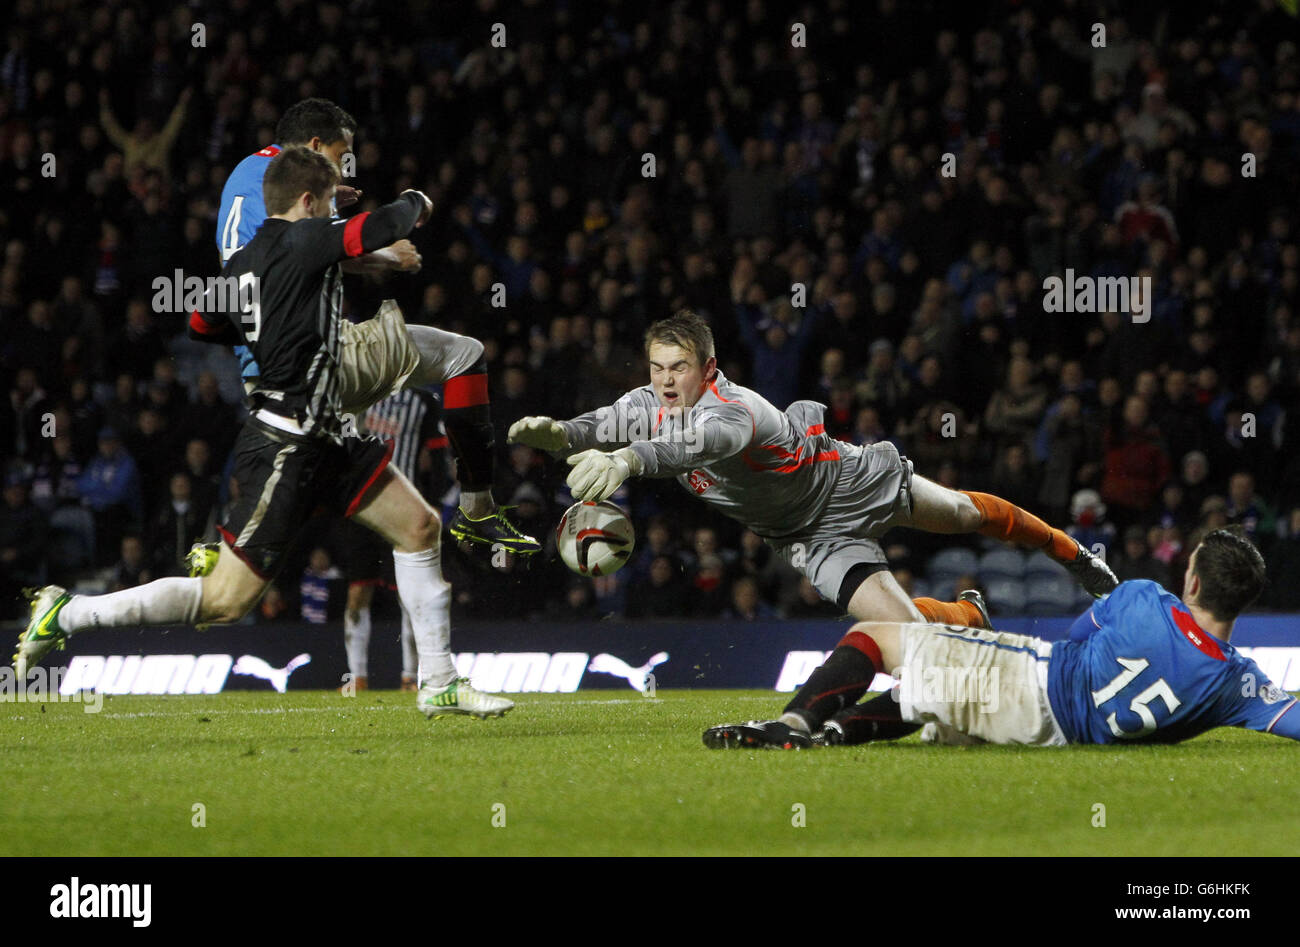 Dunfermline Athletic keeper Ryan Scully beats Rangers' Arnold Peralta to the ball during the Scottish League One match at Ibrox Stadium, Glasgow. Stock Photo